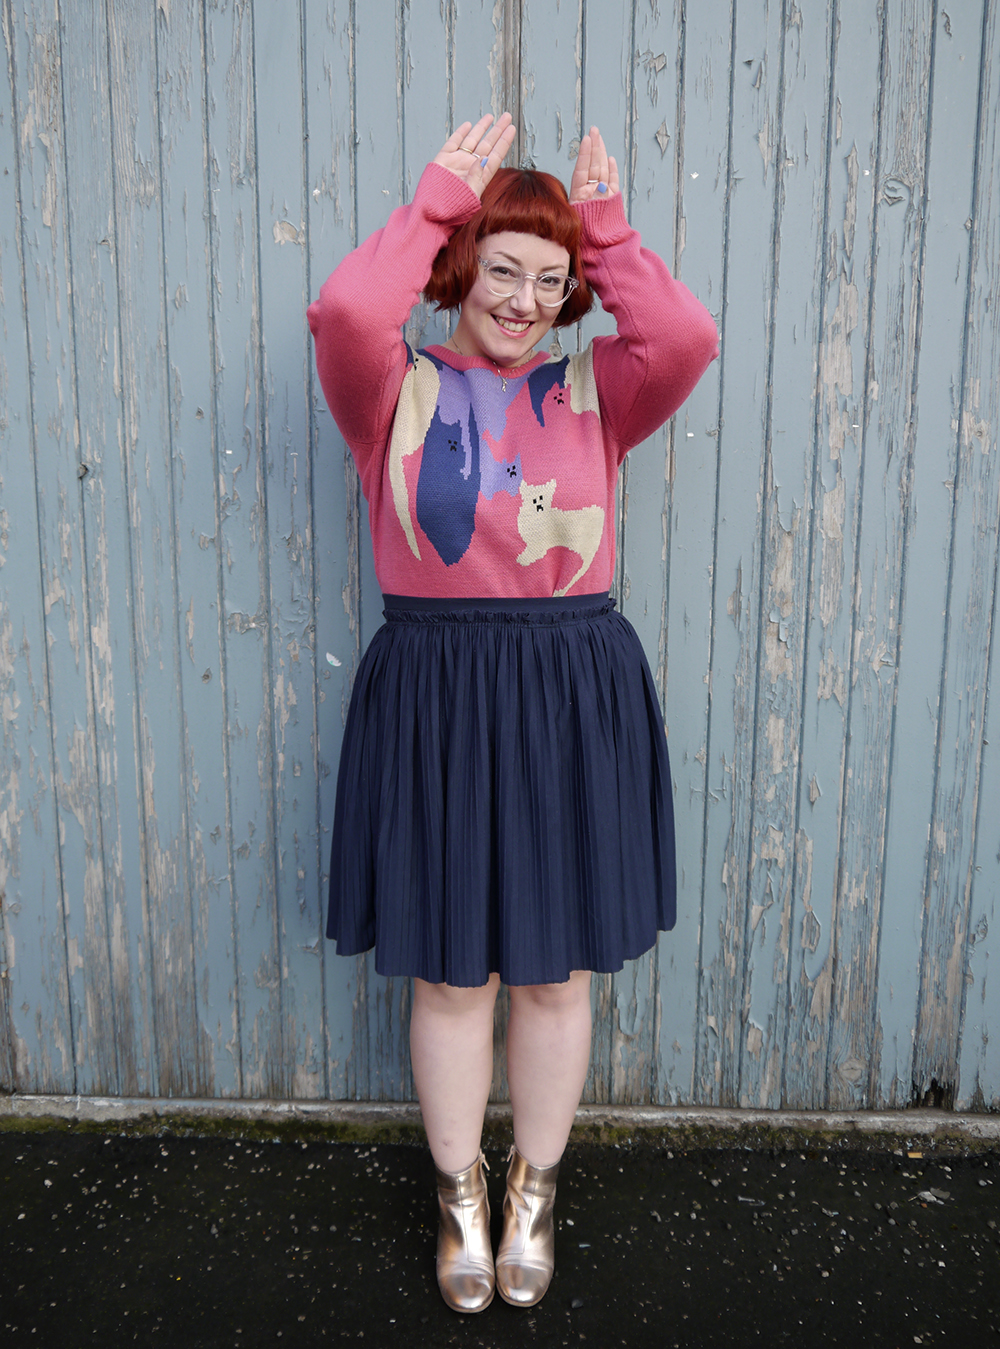 Styled by Helen, Scottish blogger, Dundee blogger, Scottish fashion blogger, quirky style, Scottish street style, cute style, cat clothing, dressing to a theme, cat themed clothing, cat jumper, colourful outfit, colourful street style, La La Land, colourful cat jumper, pink jumper, pink and blue outfit, red head, ginger bob, clear glasses, Iolla glasses, cat necklace, silver cat necklace, gold boots, cat pose, cute cat outfit